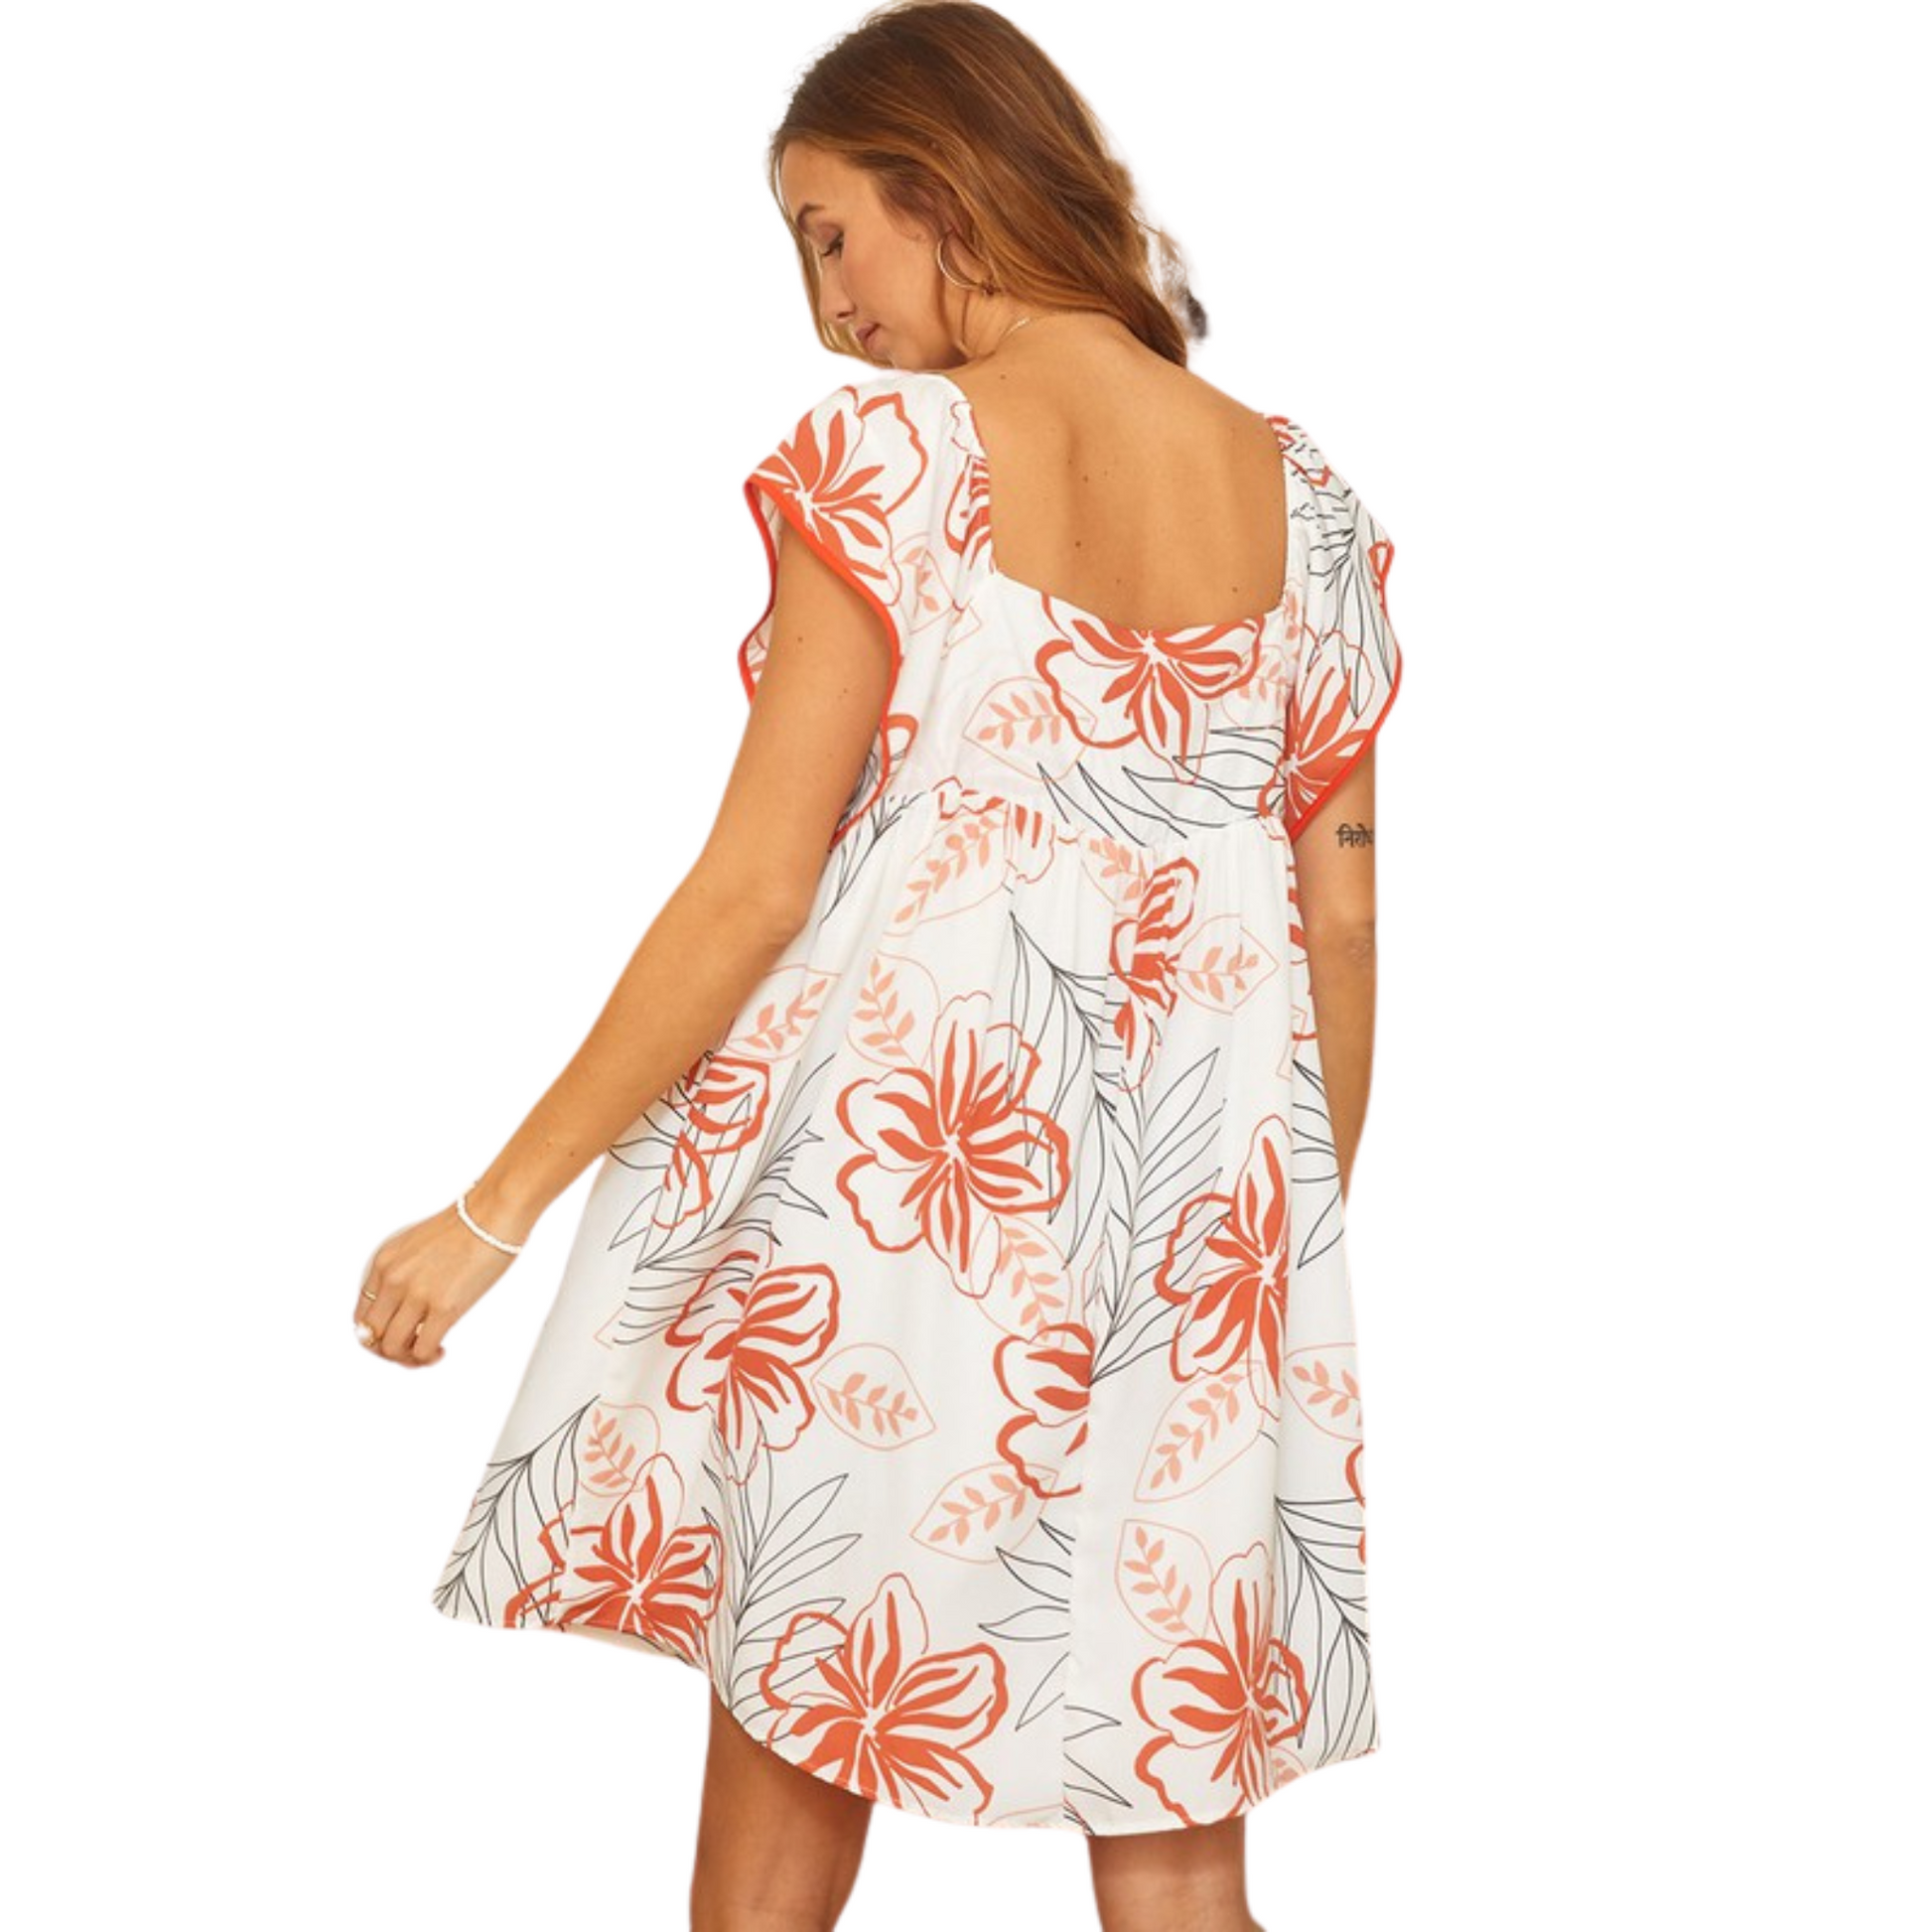 This white, floral mini dress is sure to turn heads. With a flattering square neck, flutter sleeve, and charming orange flower print, this dress is perfect for any summer occasion. Look and feel your best in this casually elegant swing dress.